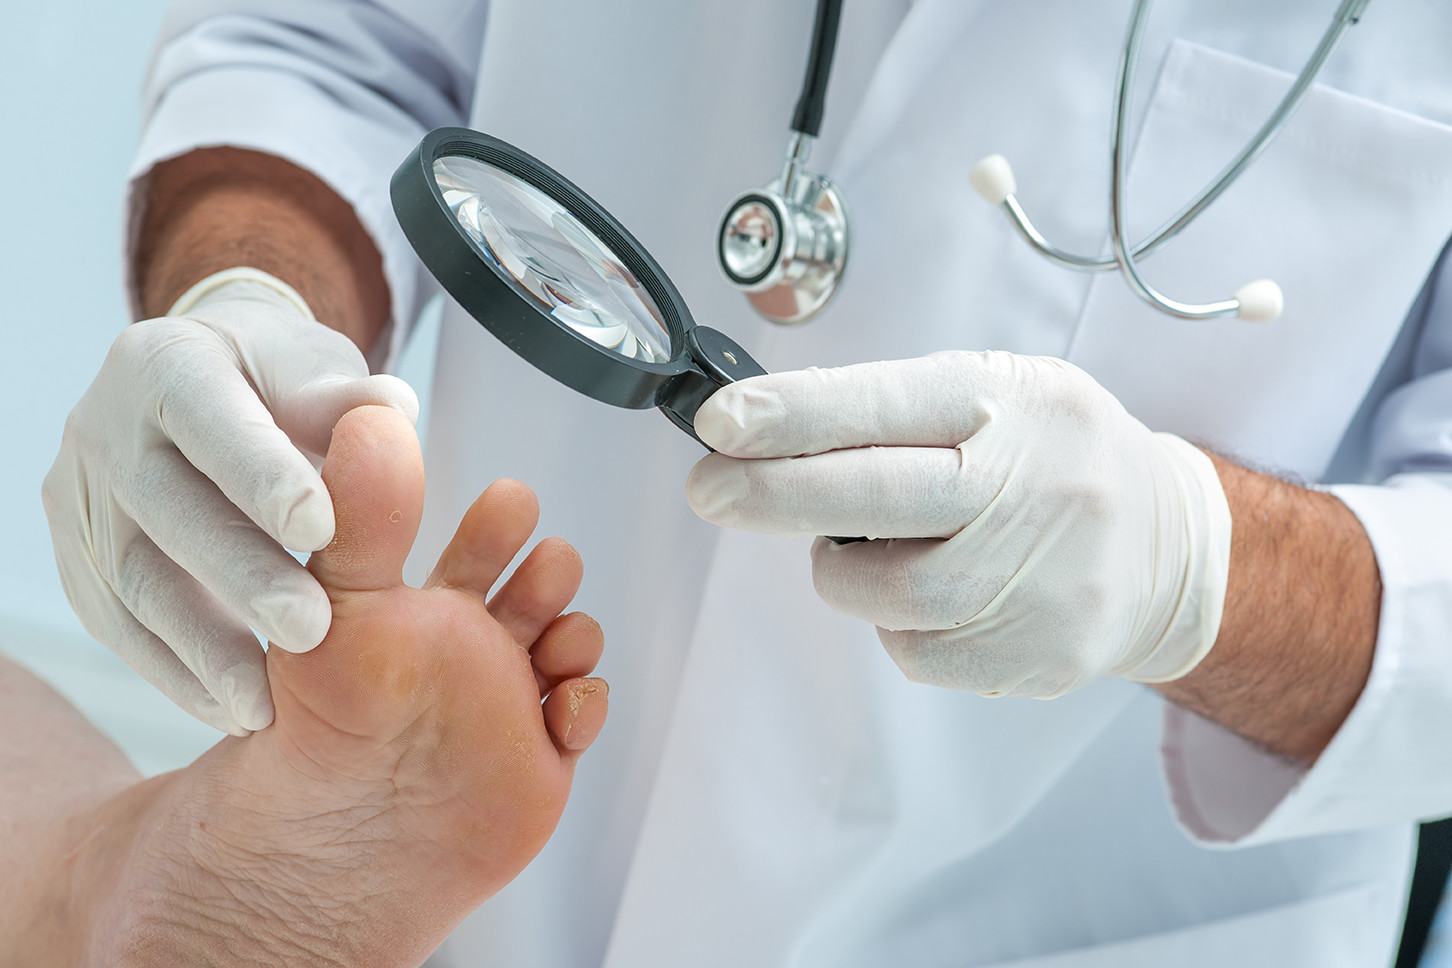 Diagnosis of diabetic foot ulcer